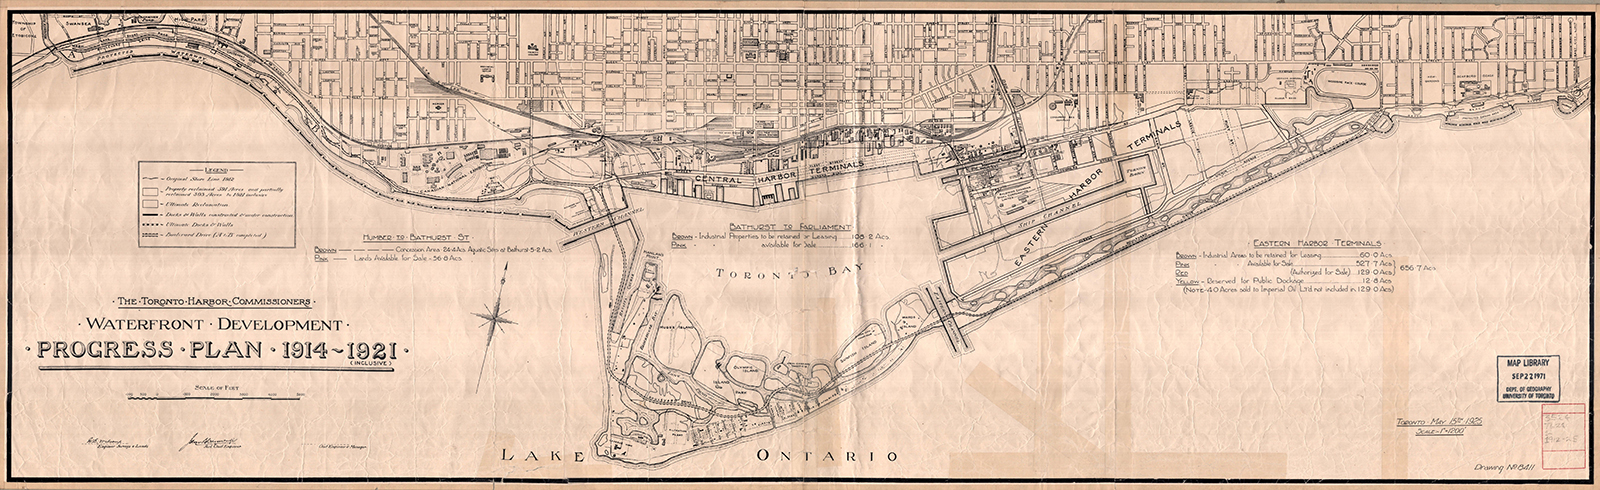 This plan from the Toronto Harbor Commissioners, originally published in 1912, for the Toronto waterfront and harbour eventually led to the development of the Port Lands. It featured a boulevard linking the western harbour with the new port, with bridges that were planned to span the western channel and the eastern gap